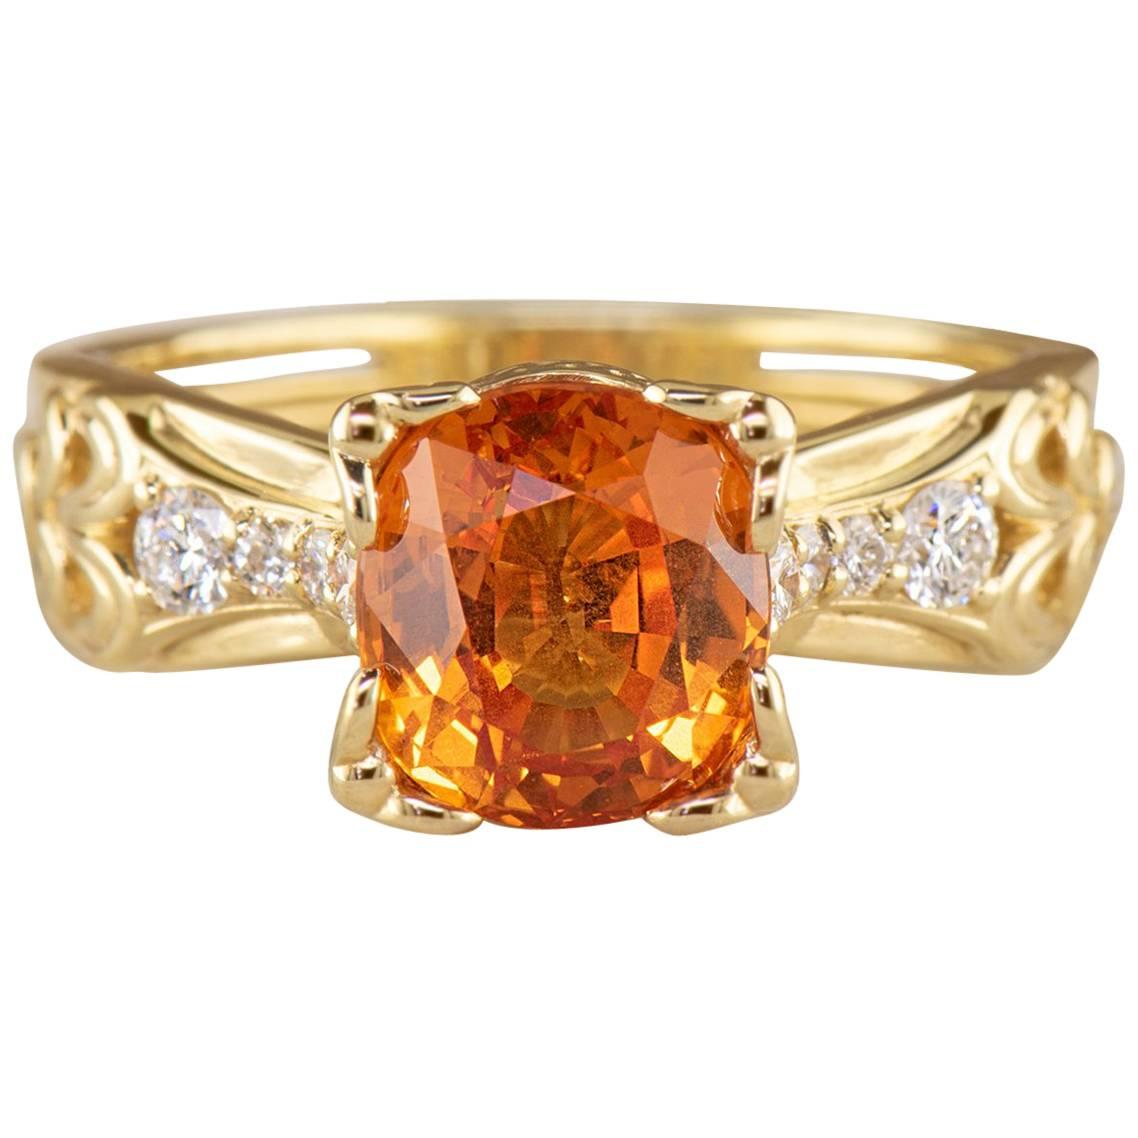 Dianna Rae Jewelry 3.16 ct. Oval Orange Sapphire Ring in 18k Diamond Accent For Sale